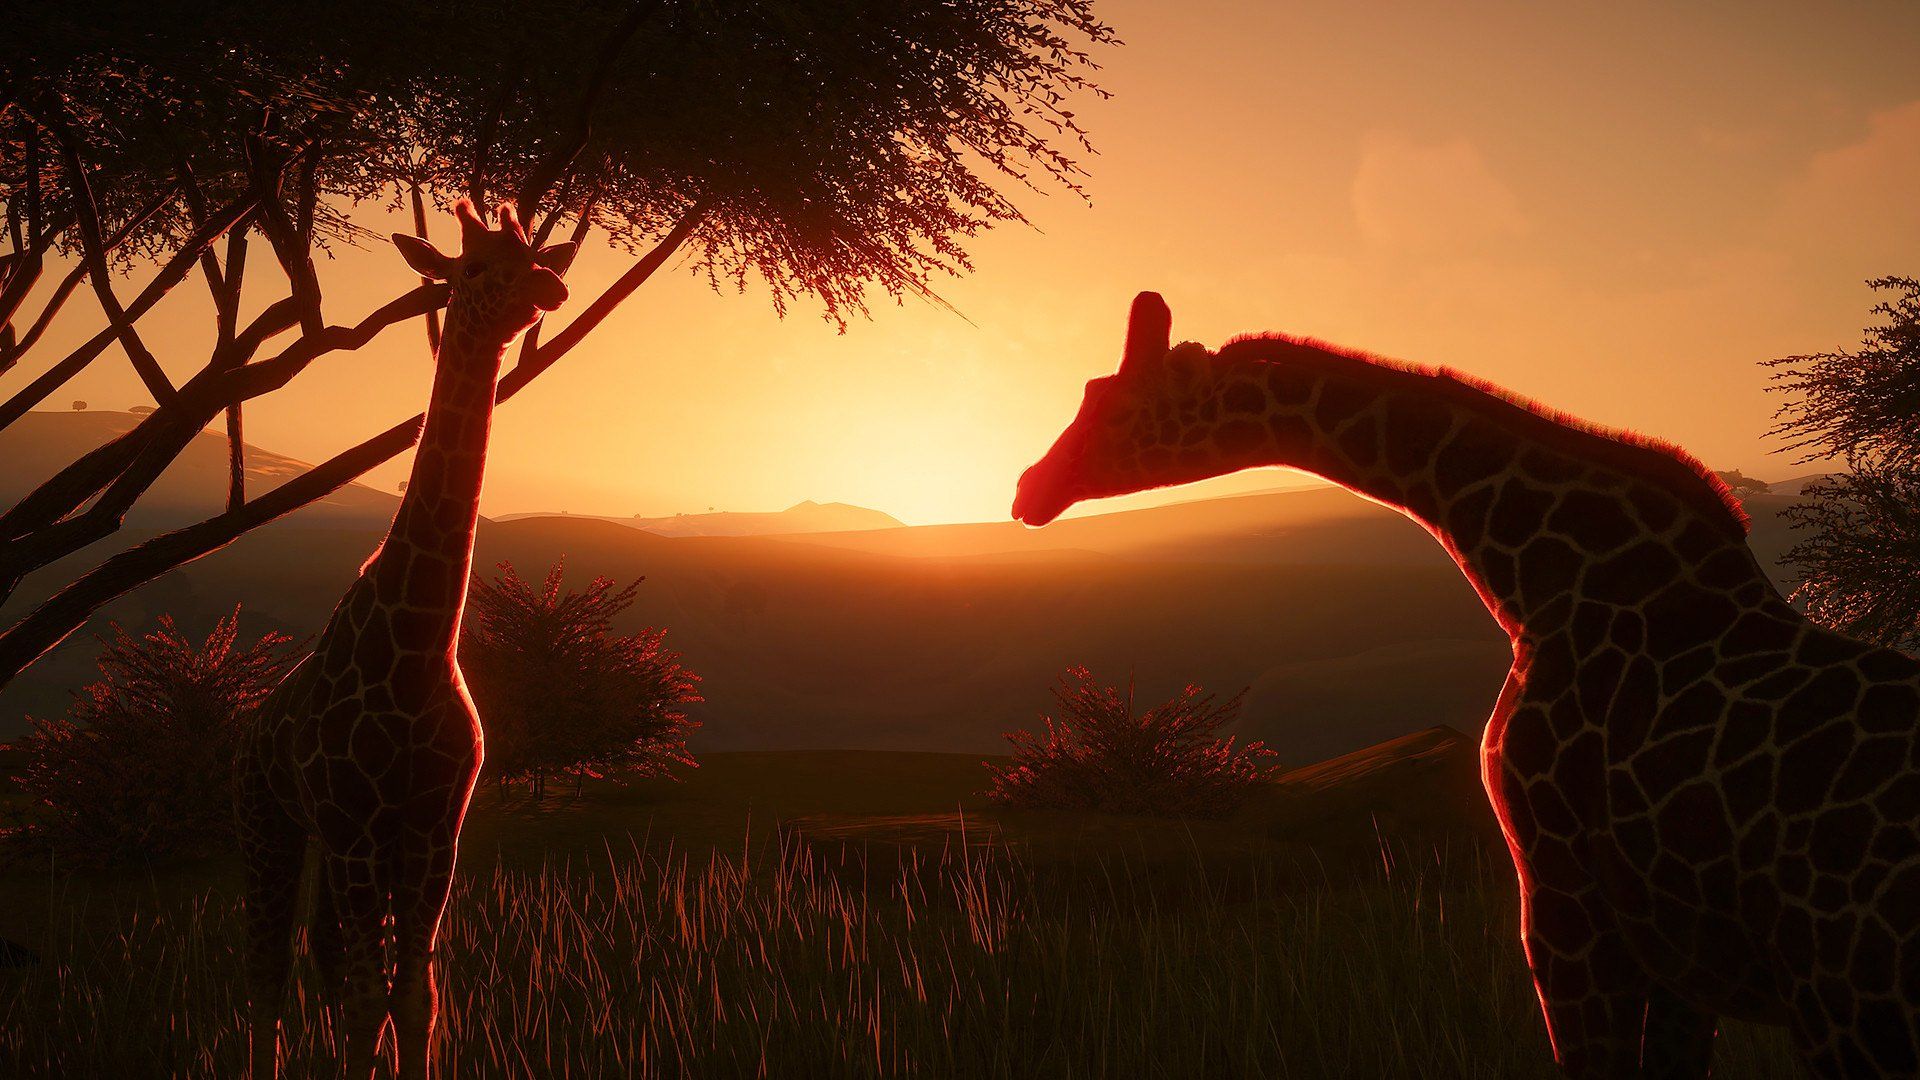 Planet Zoo 2020 Wallpapers